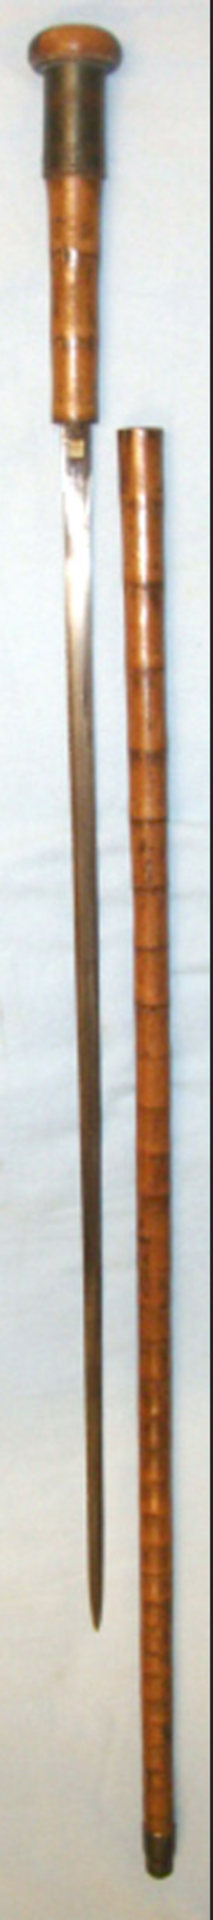 Victorian English Gentleman's Cane Sword Stick With Brass Fittings Marked 'Bernard 4 Church Place' - Image 2 of 3